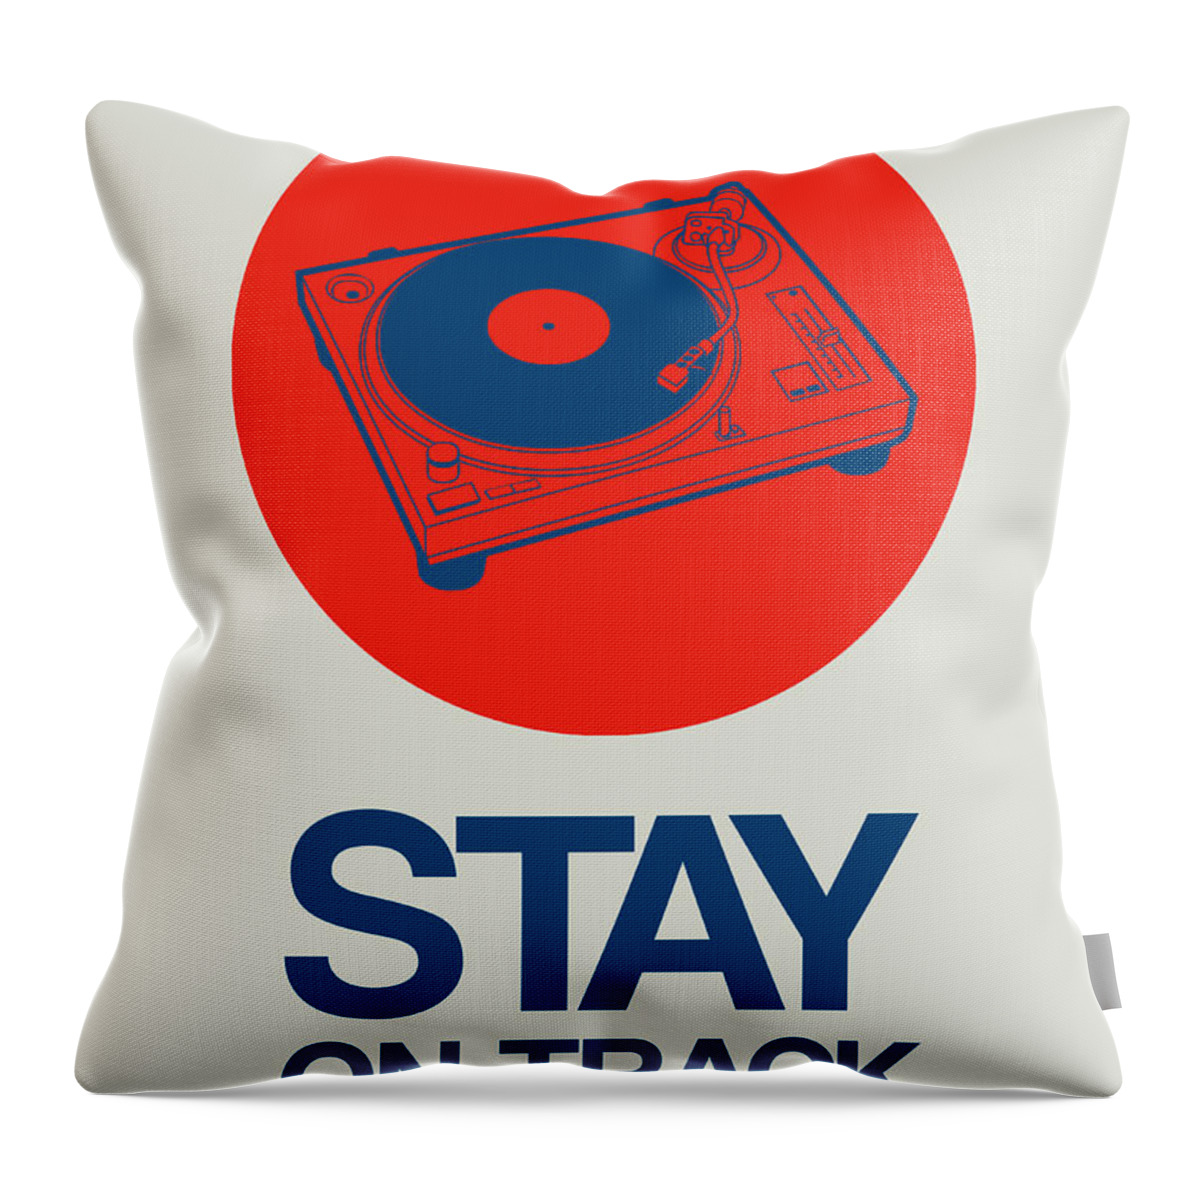  Throw Pillow featuring the digital art Stay On Track Record Player 1 by Naxart Studio